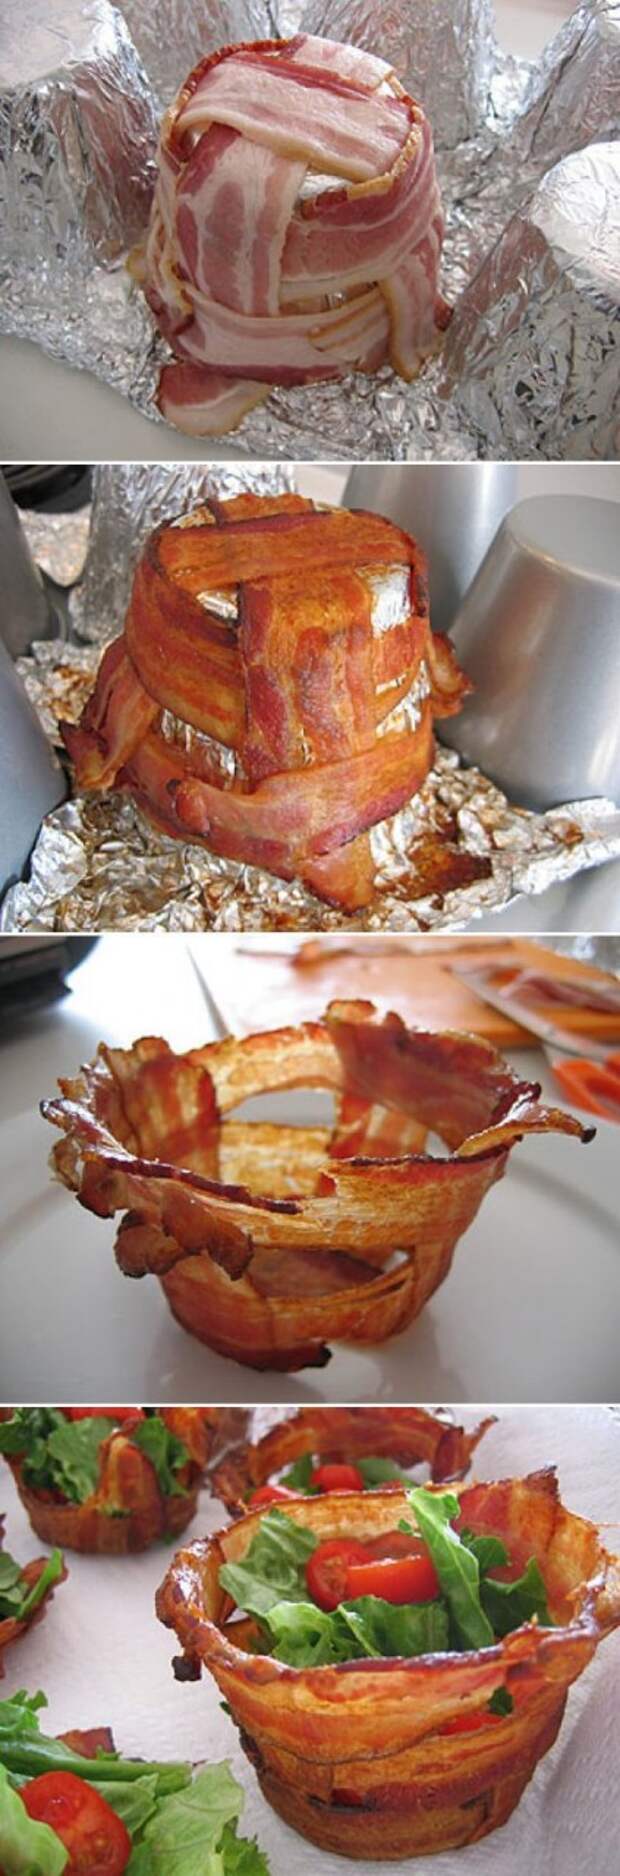 Bacon Cups for salad or mashed potatoes... Yum  great for the holidays!.: 